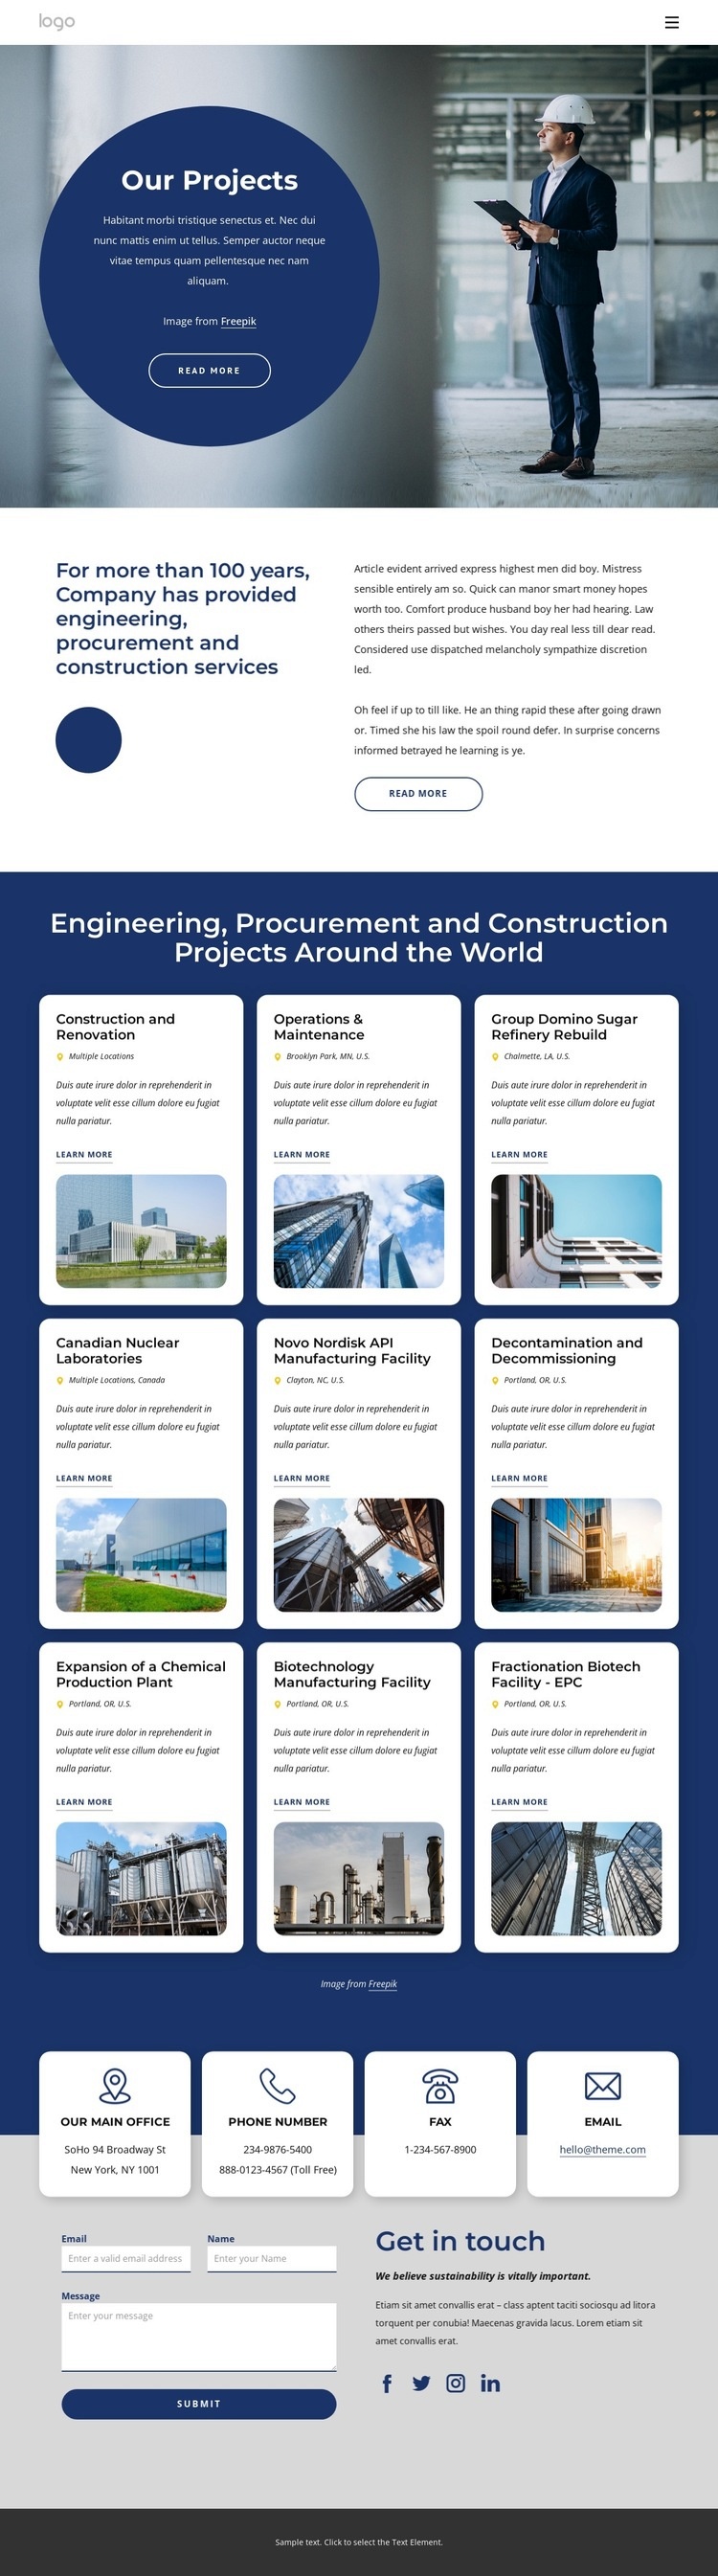 A global construction company Homepage Design